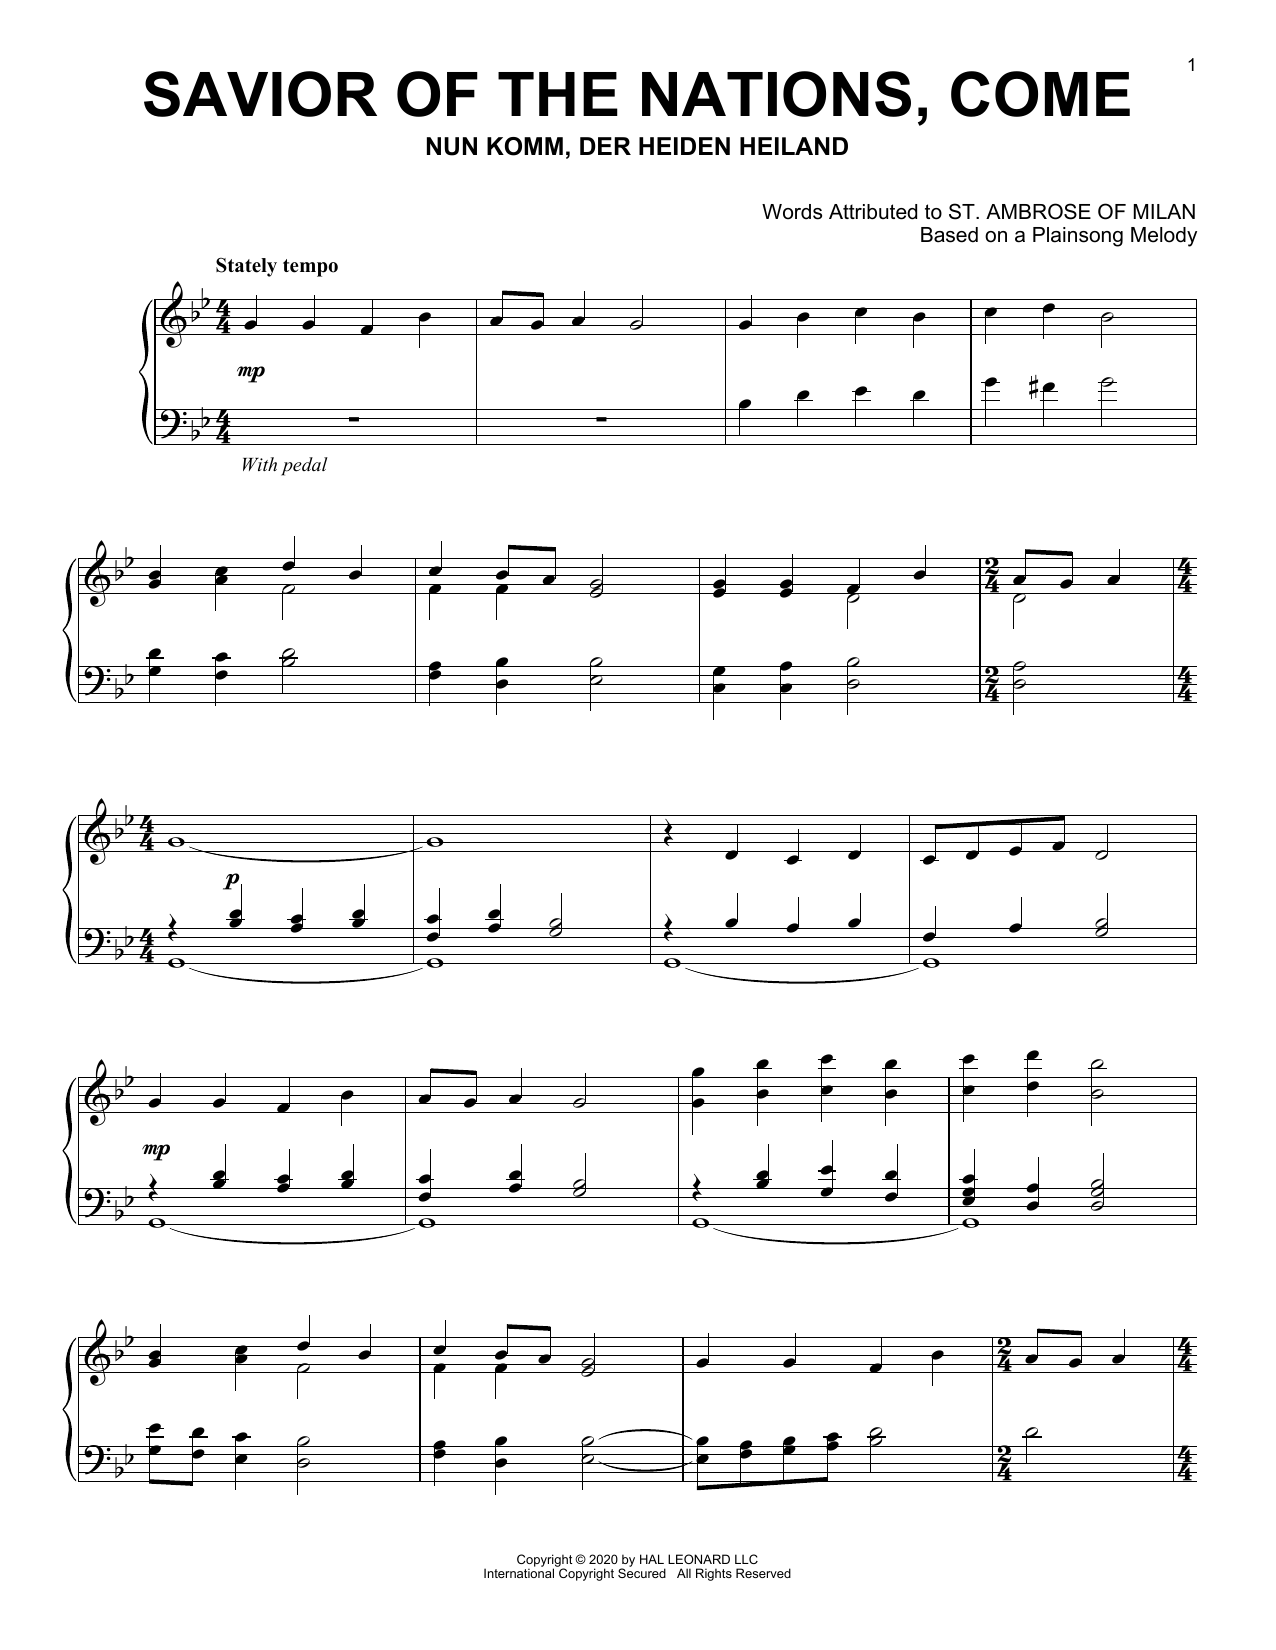 Download Plainsong Melody Savior Of The Nations, Come Sheet Music